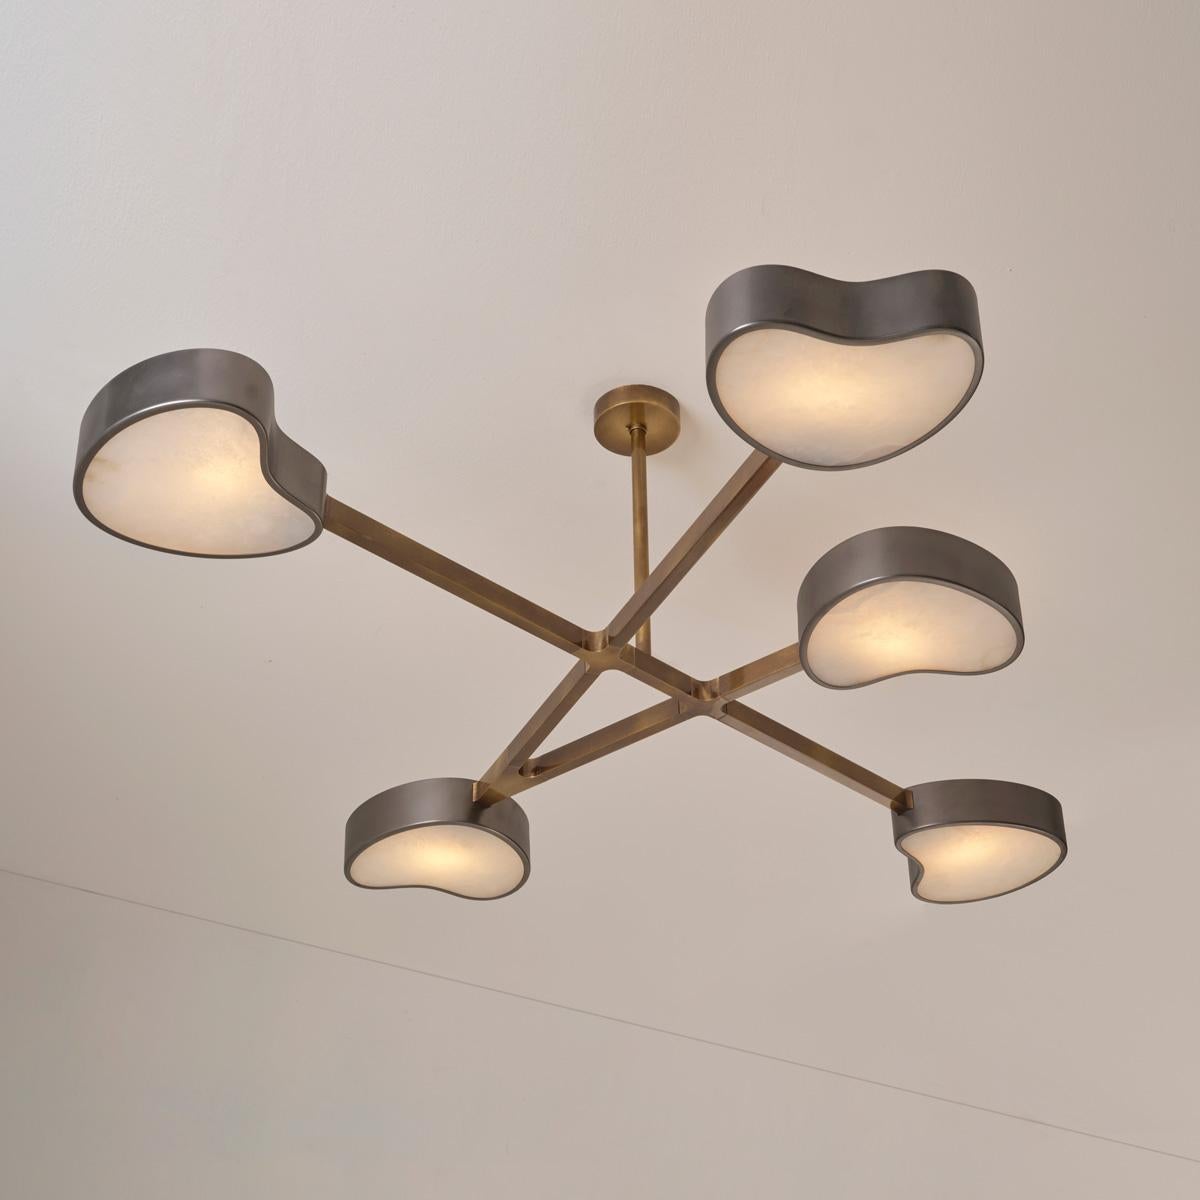 Italian Cuore N.5 Ceiling Light by Gaspare Asaro. Satin Brass and Sand White Finish For Sale